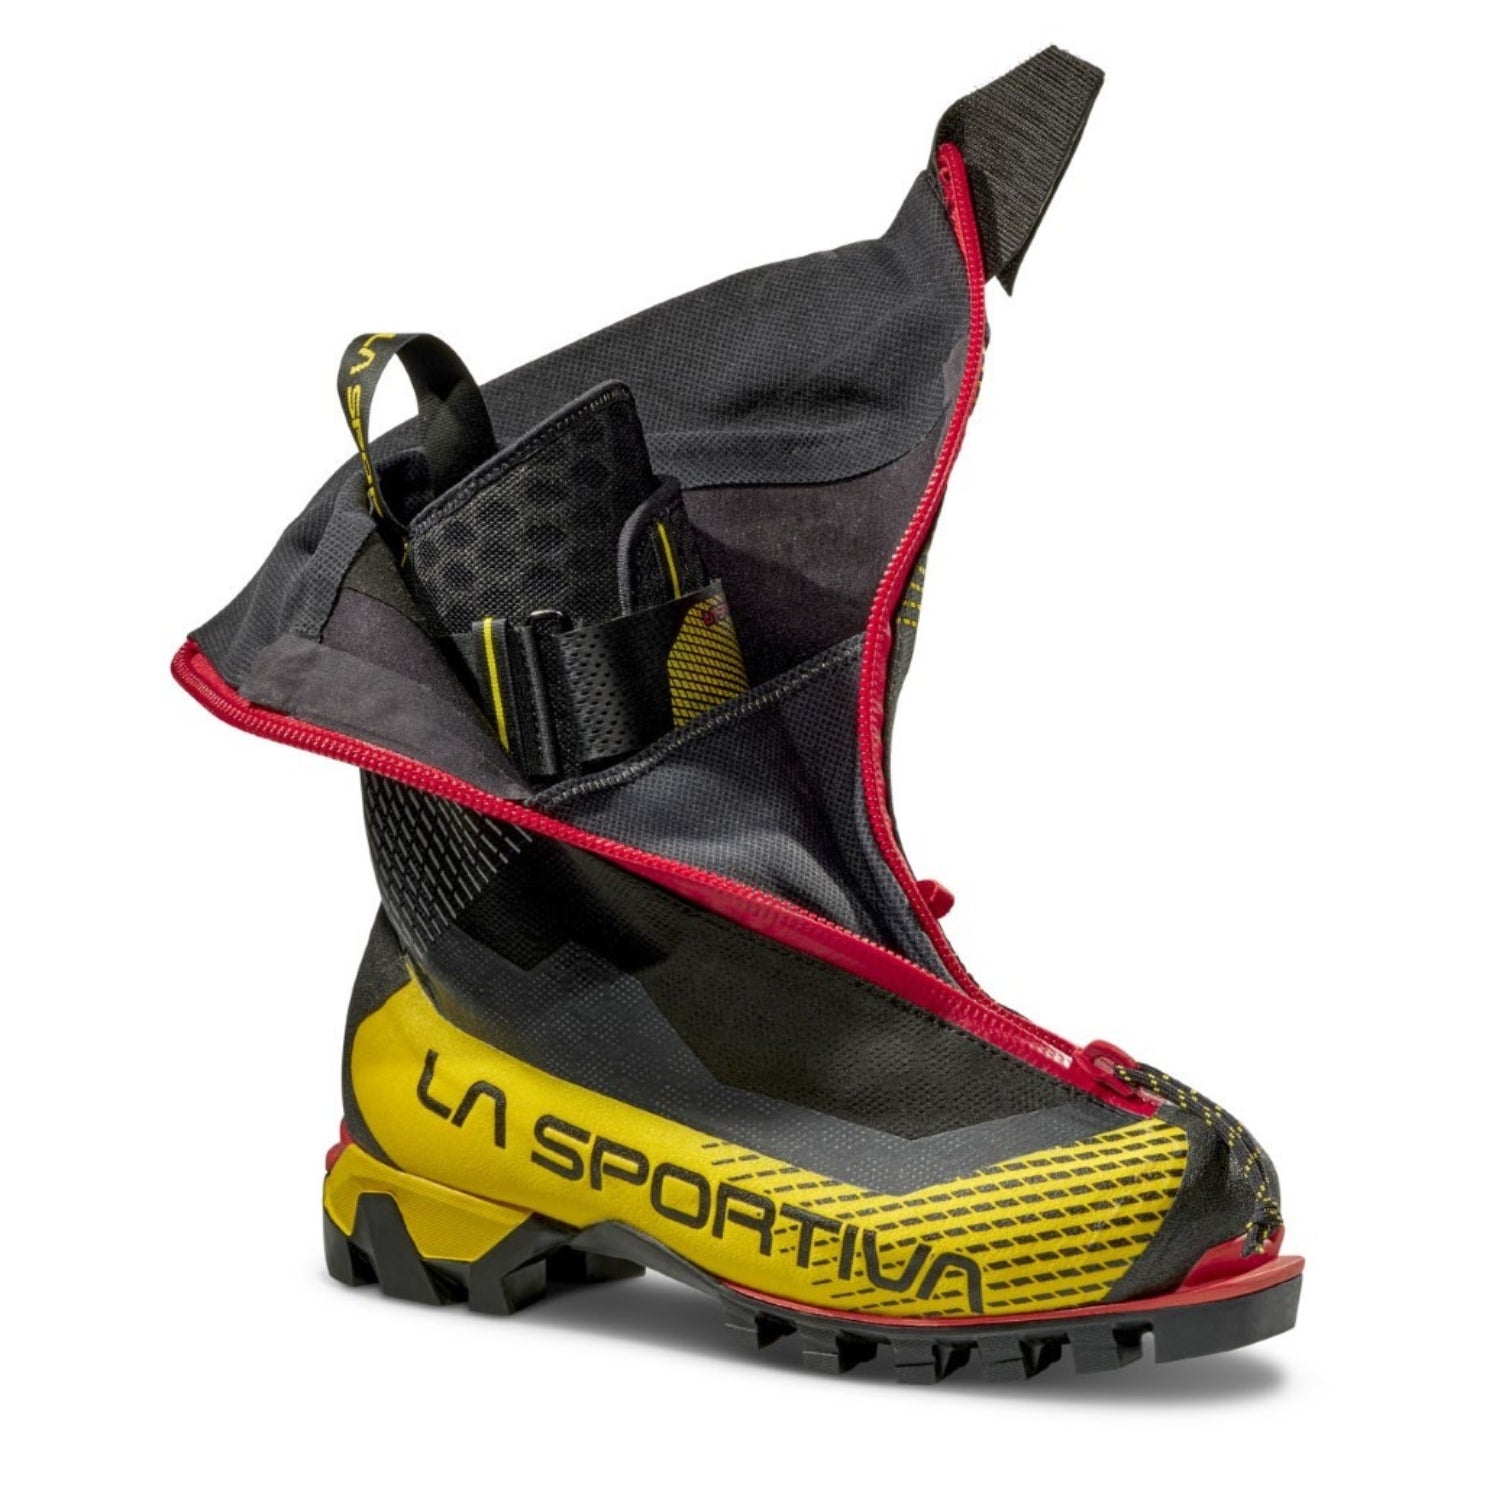 La Sportiva G-Tech mountaineering boots in black red and yellow, showing side on